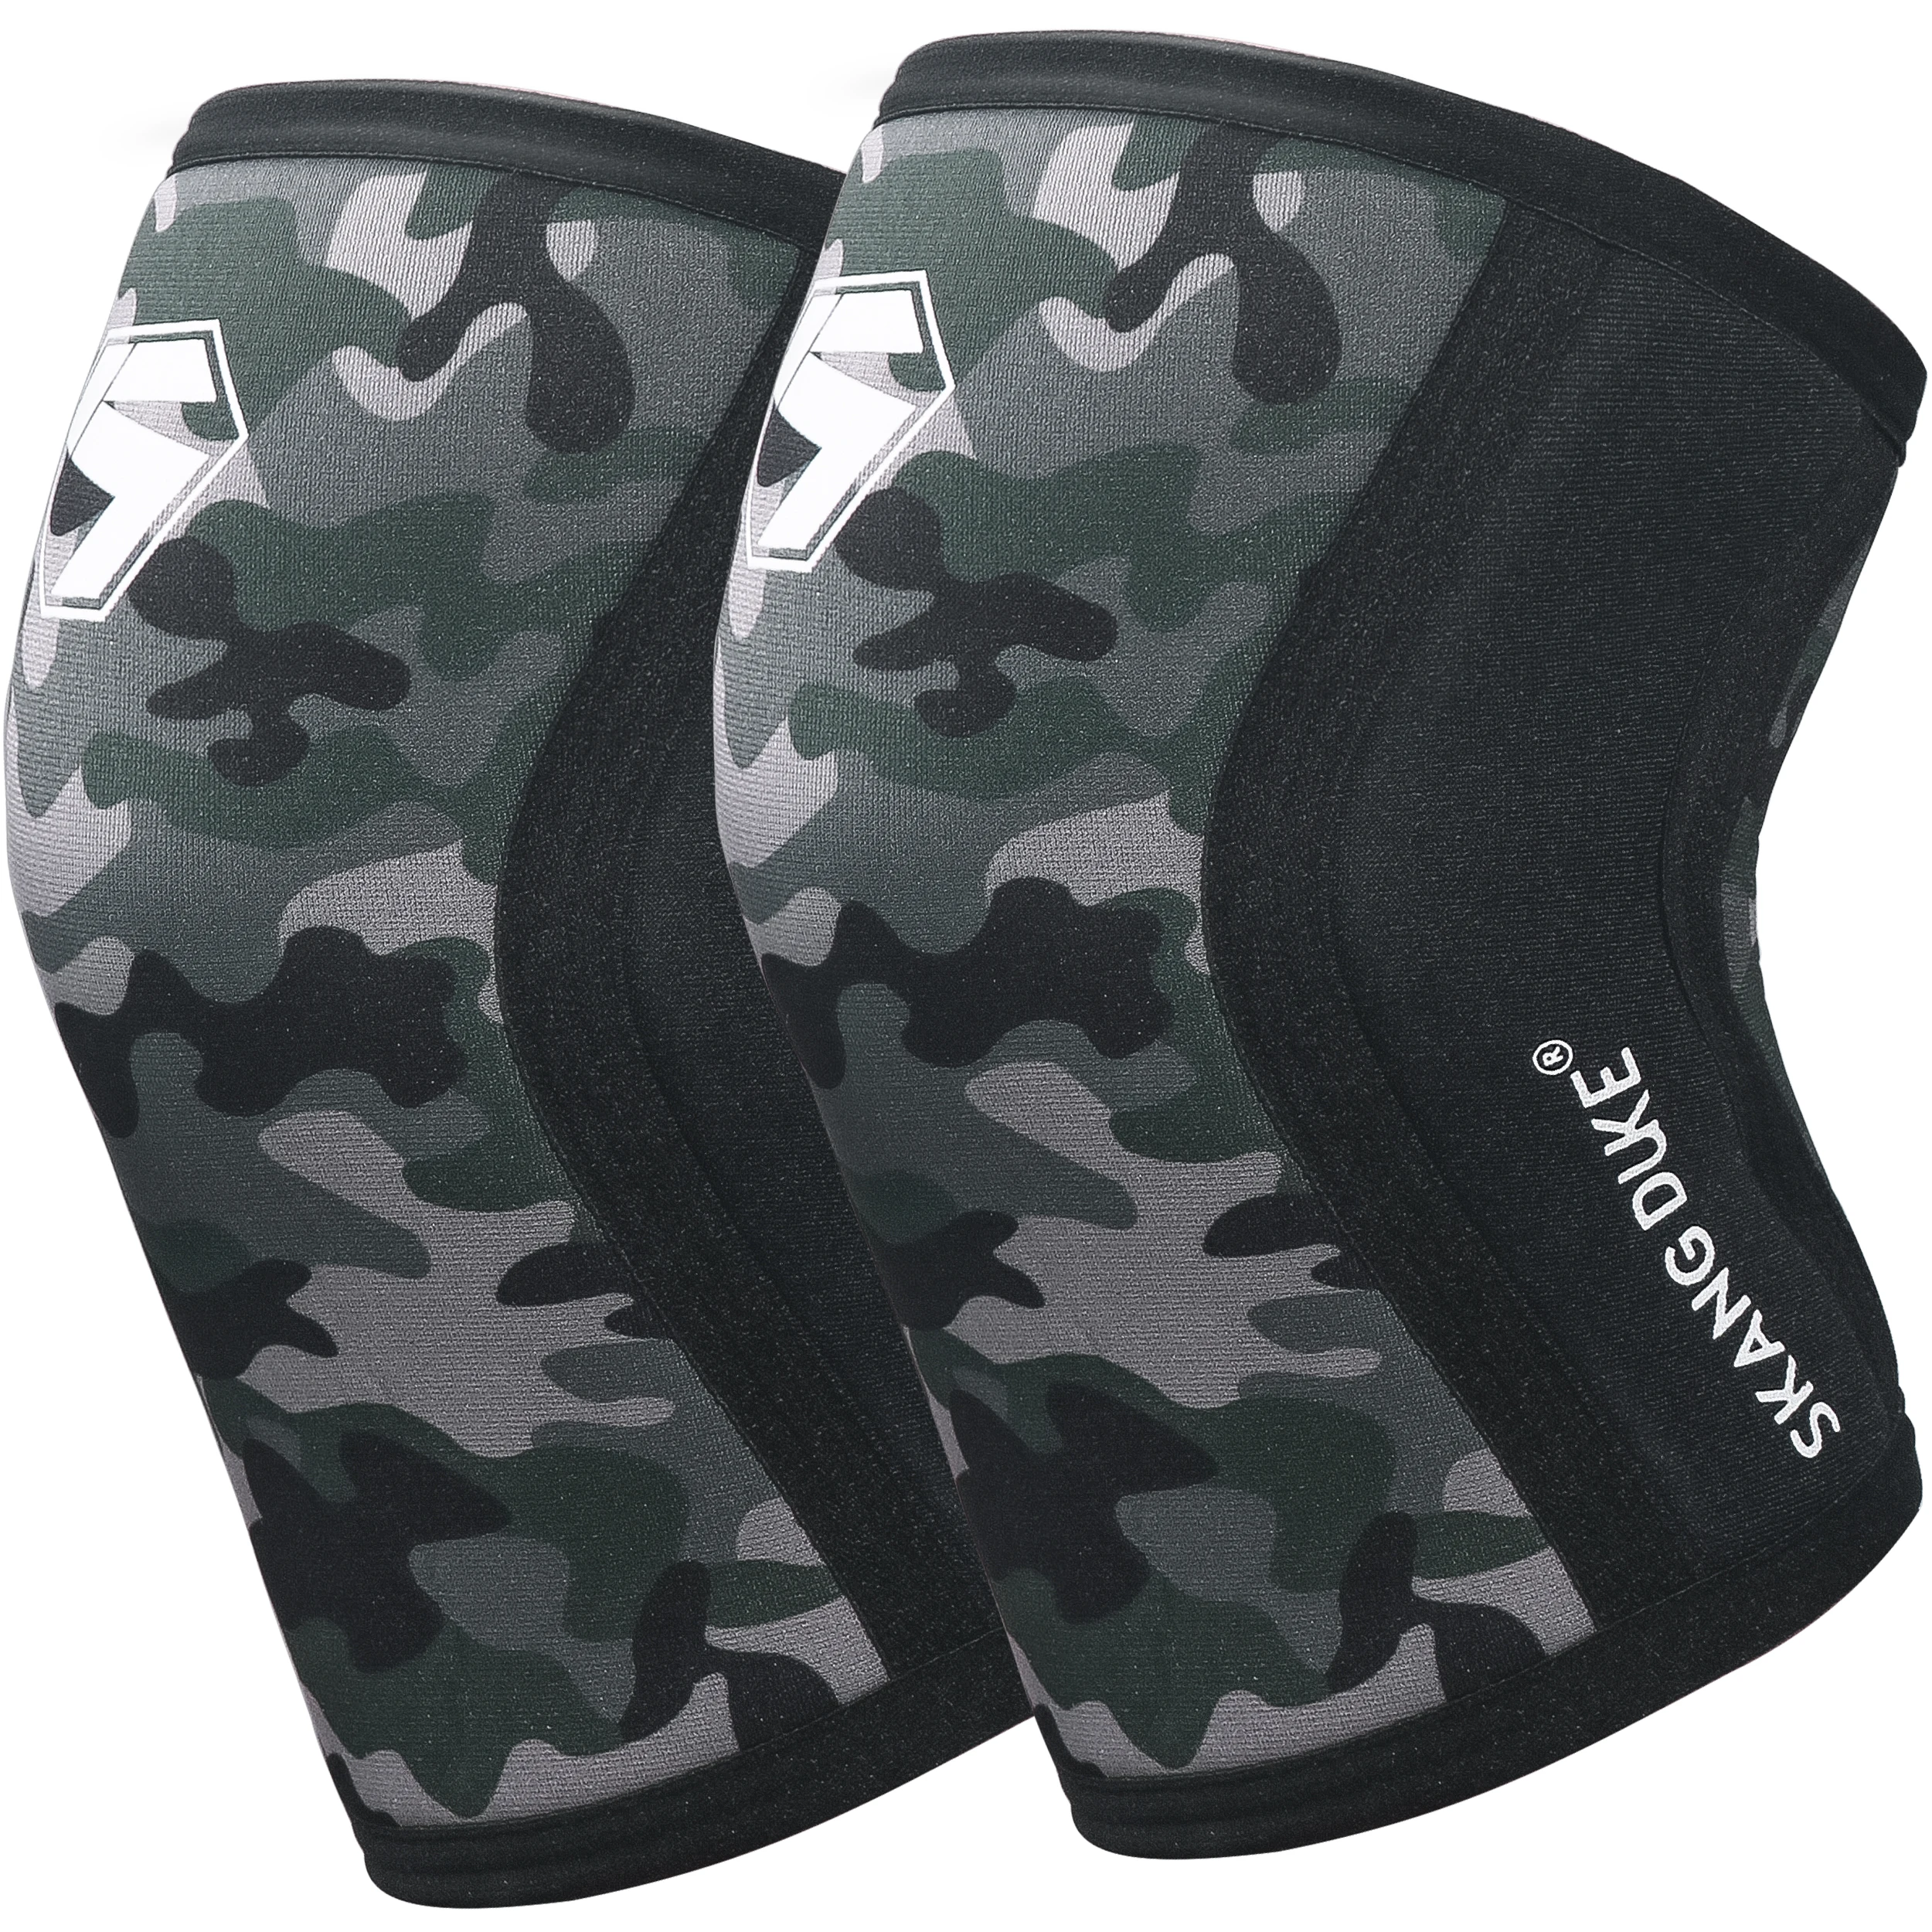 

Customized Gym Fitness Training Sports Knee Pads Weightlifting Squats Compression 7mm Neoprene Knee Sleeves, Camouflage,green,black customized color